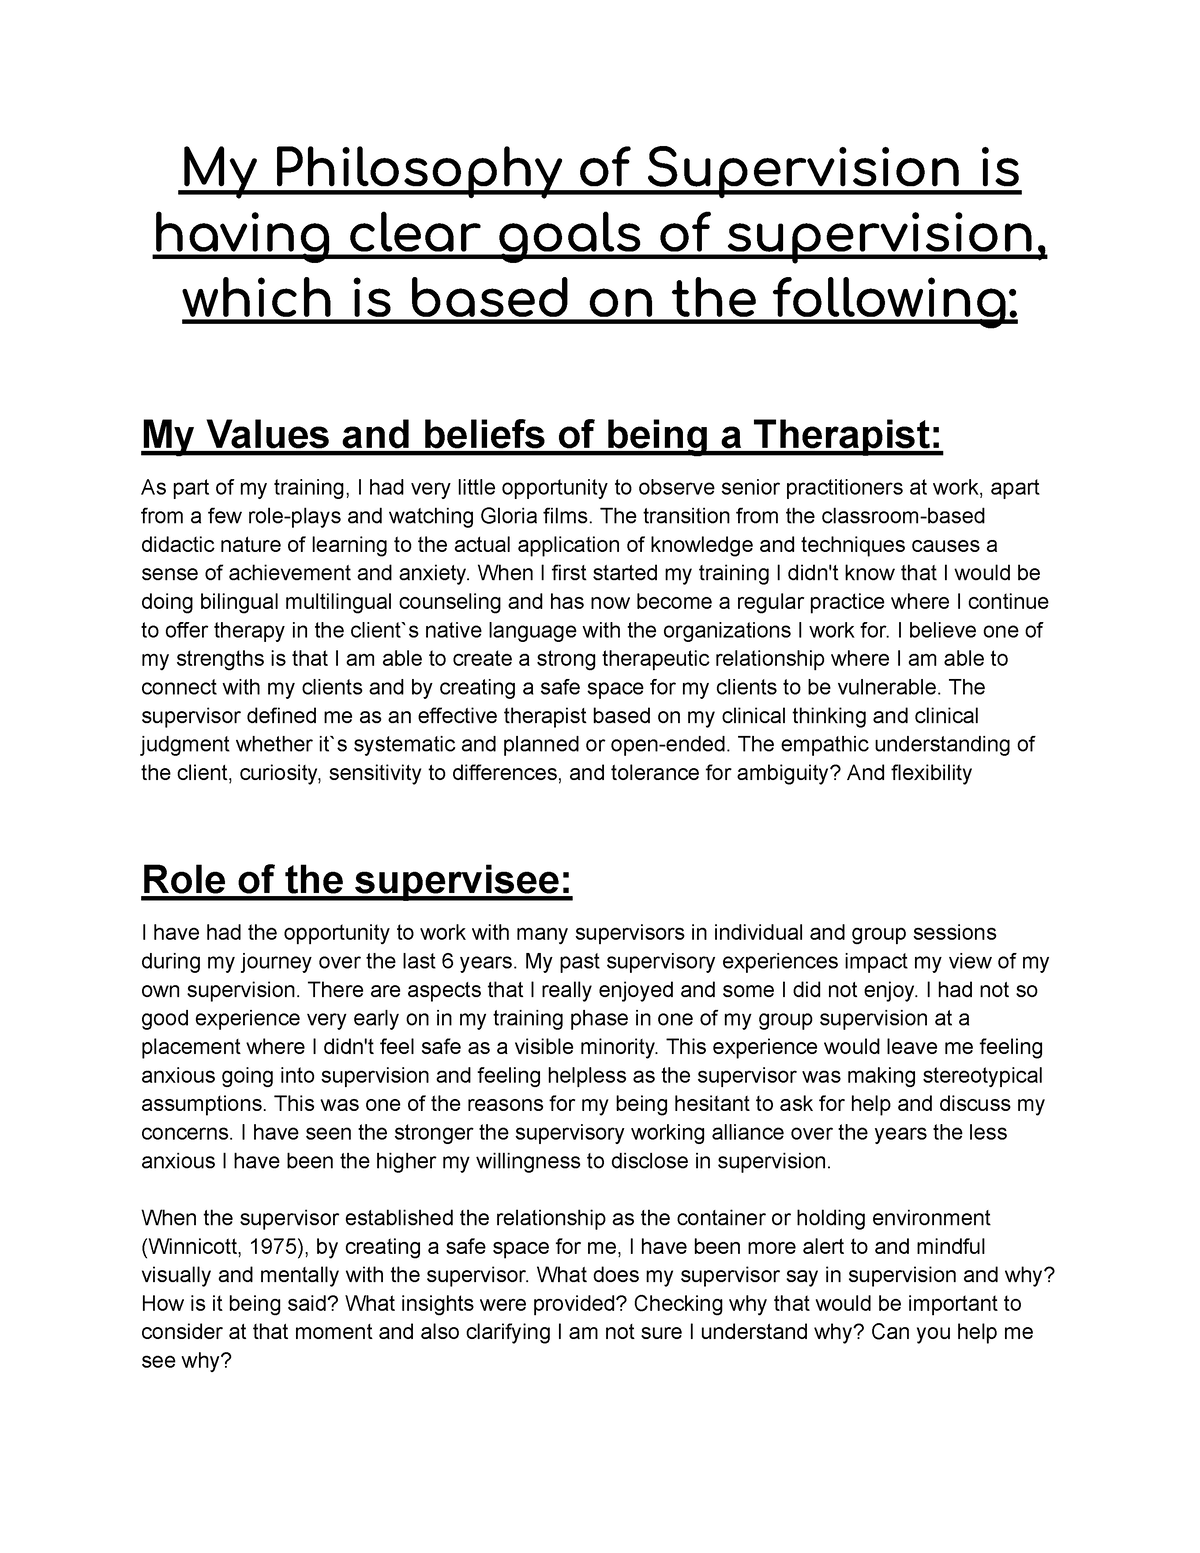 supervision essay in english